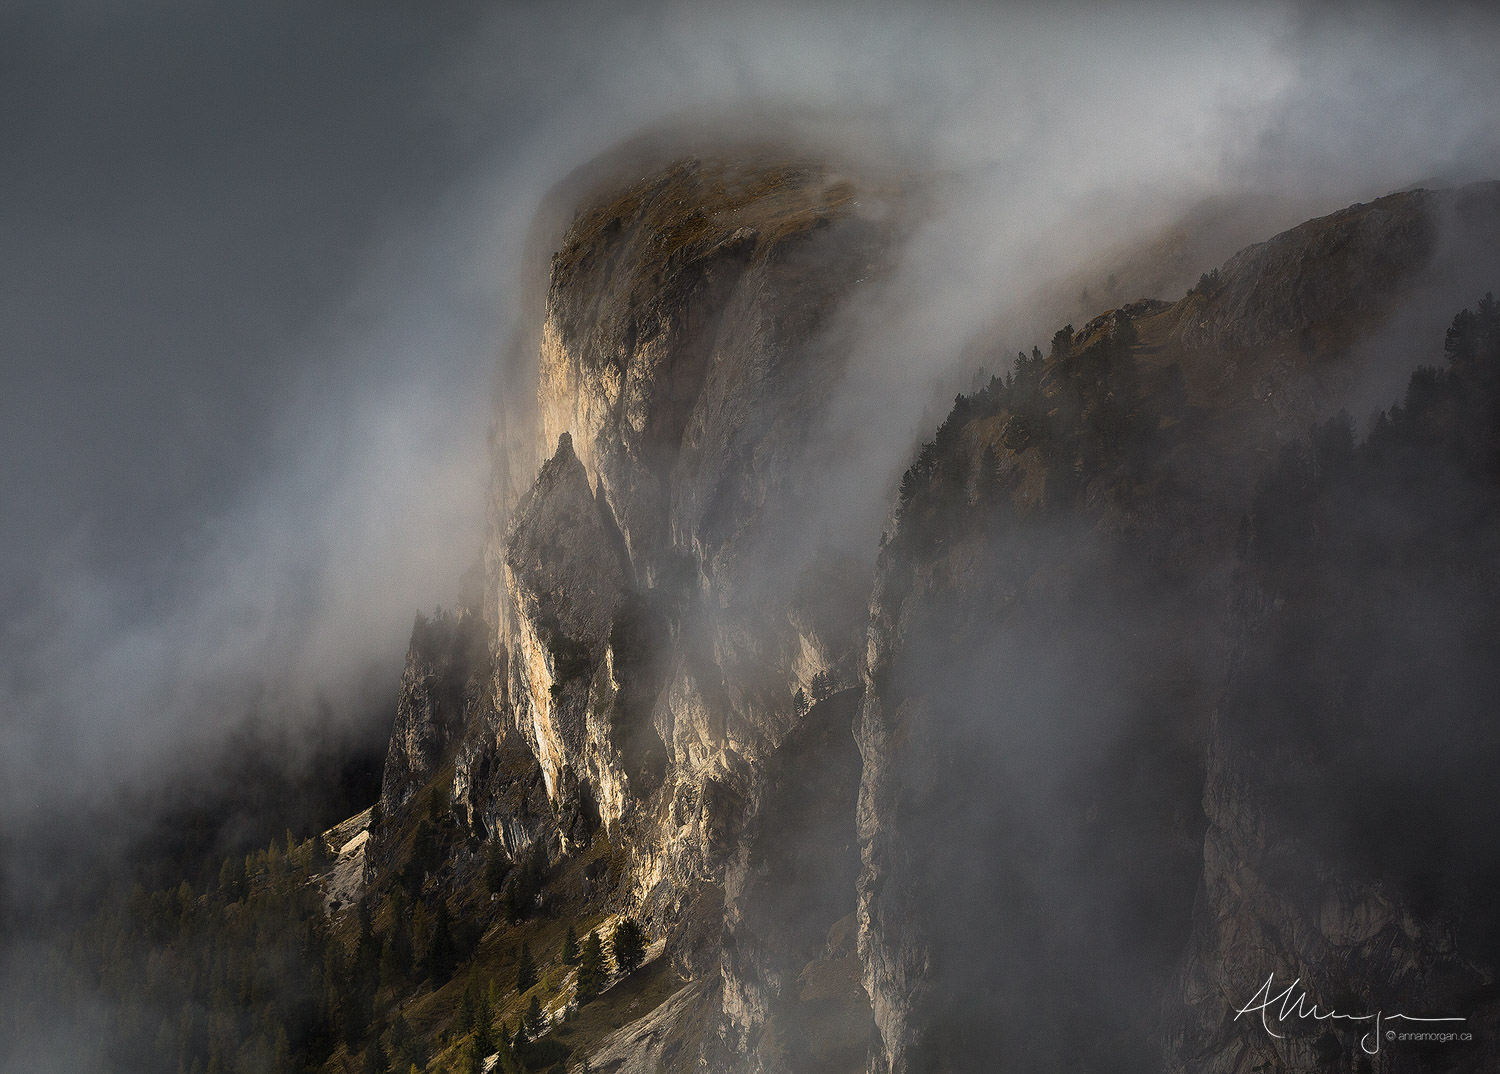 Mist wafting over a mountain face in the Dolomites, Italy